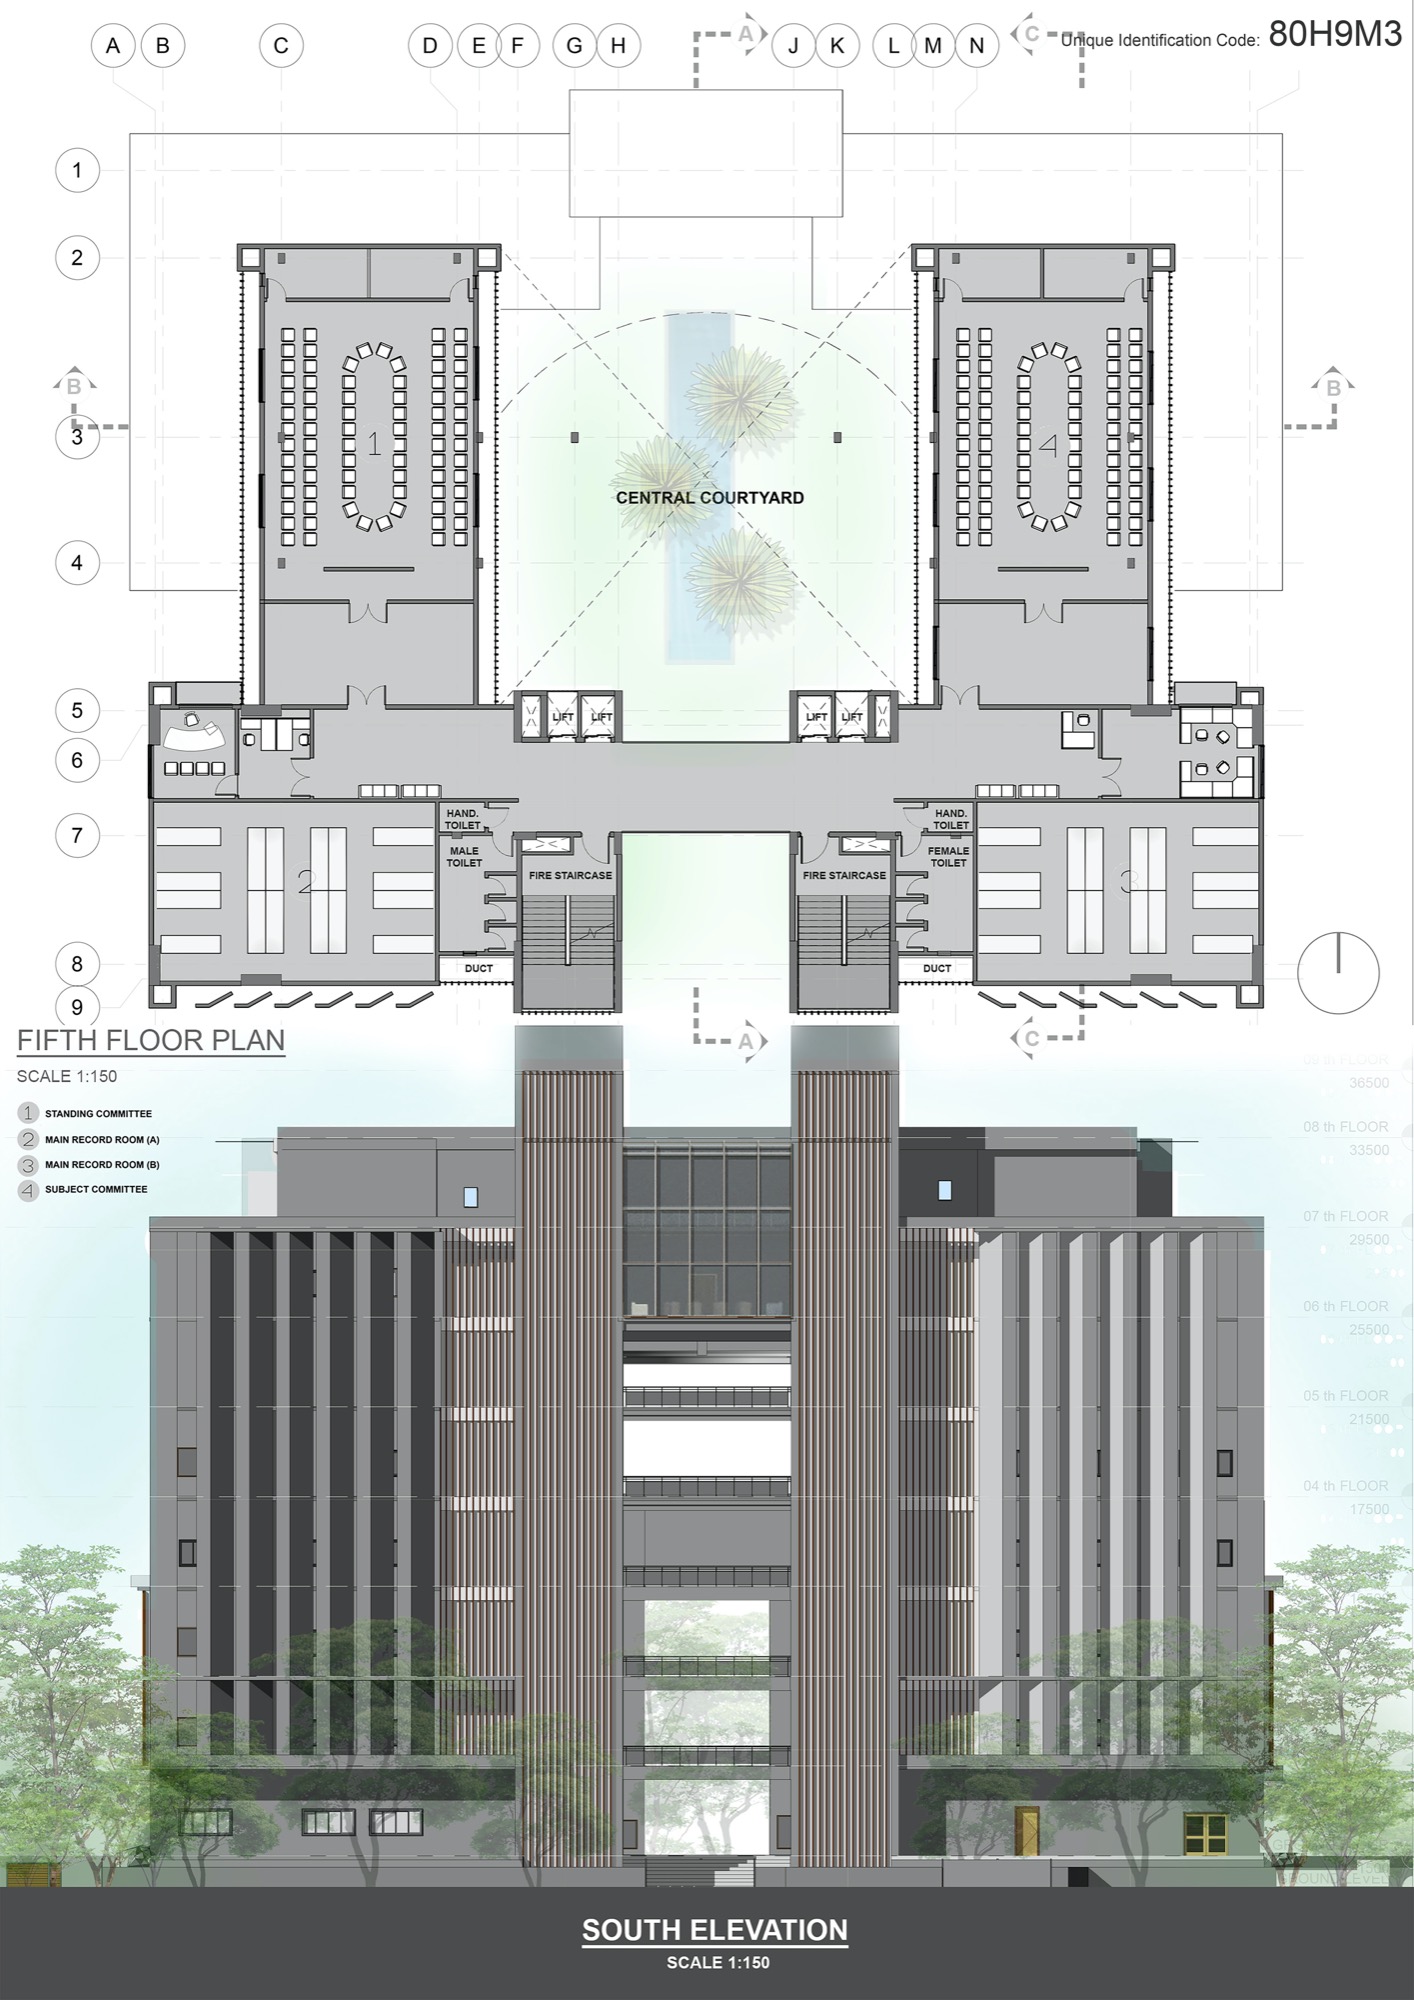 Satara Municipal Corporation, Shortlisted competition entry by Studio UD+AC 20